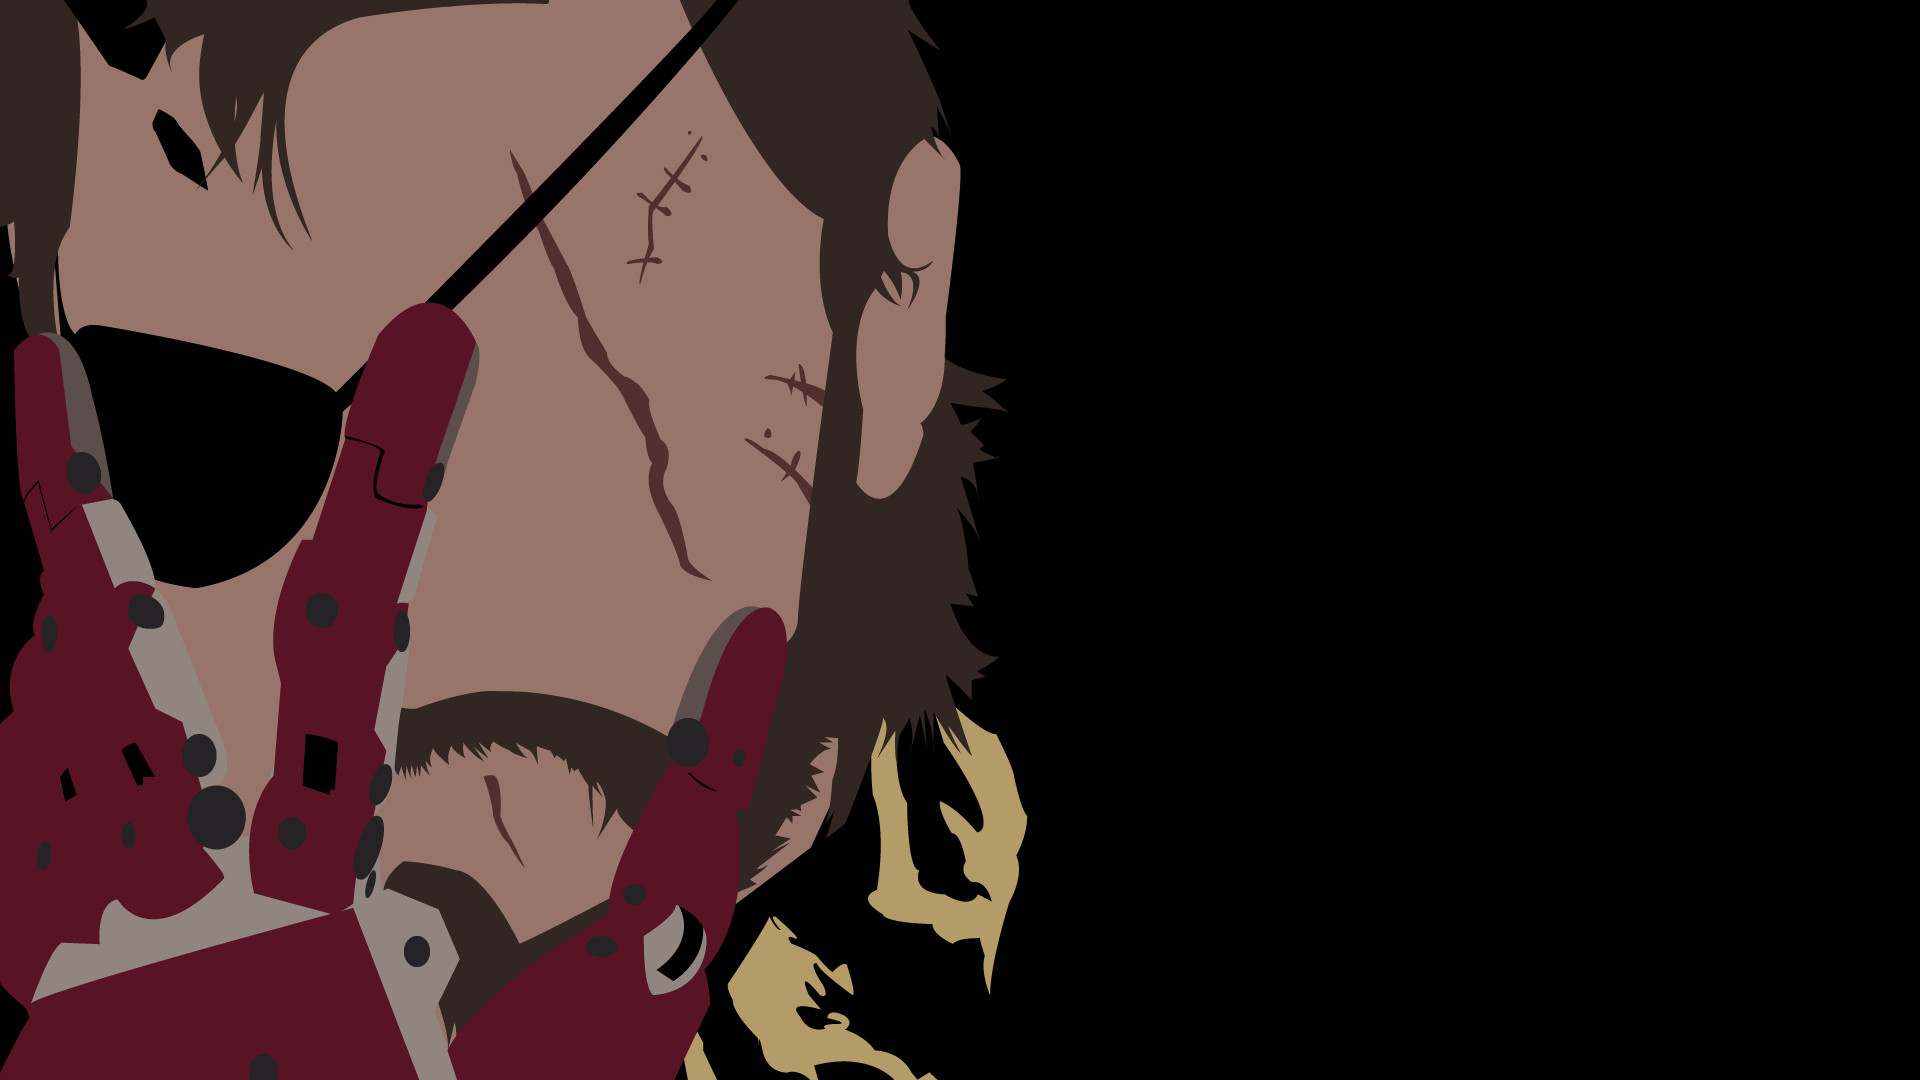 Metal Gear Solid V the Phantom Pain Wallpapers.